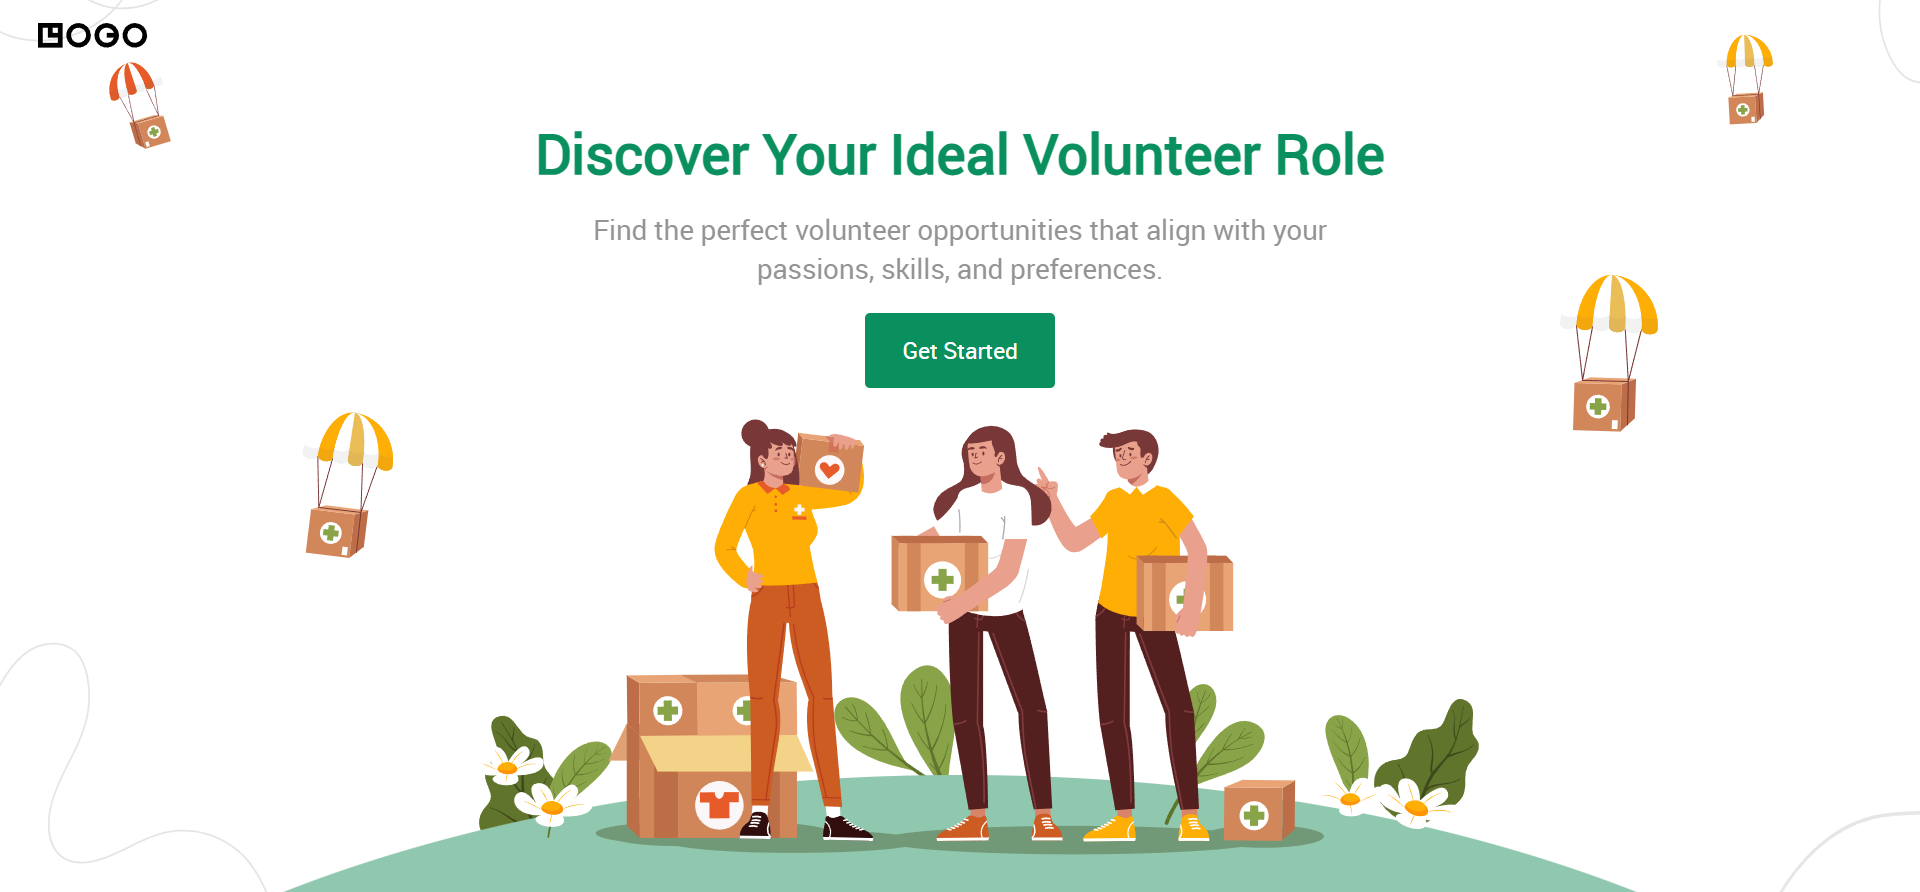 Discover Your Ideal Volunteer Role